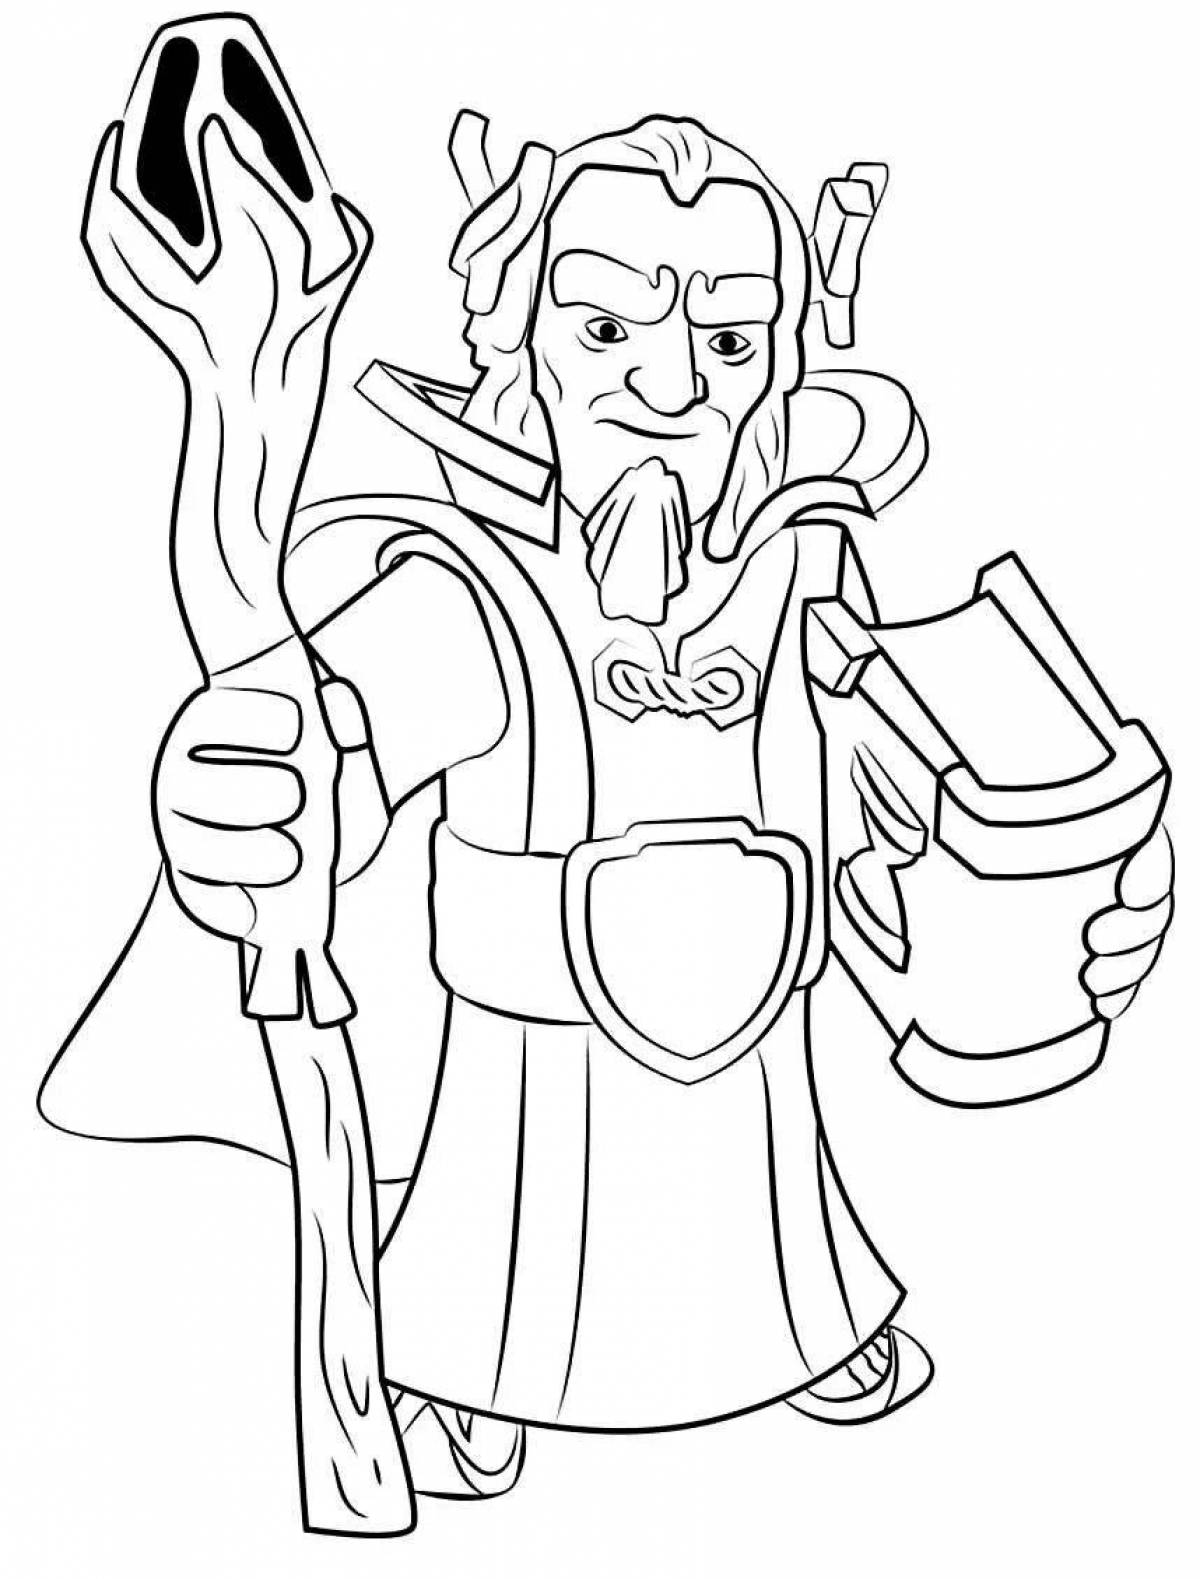 Touching clash royale arena coloring page